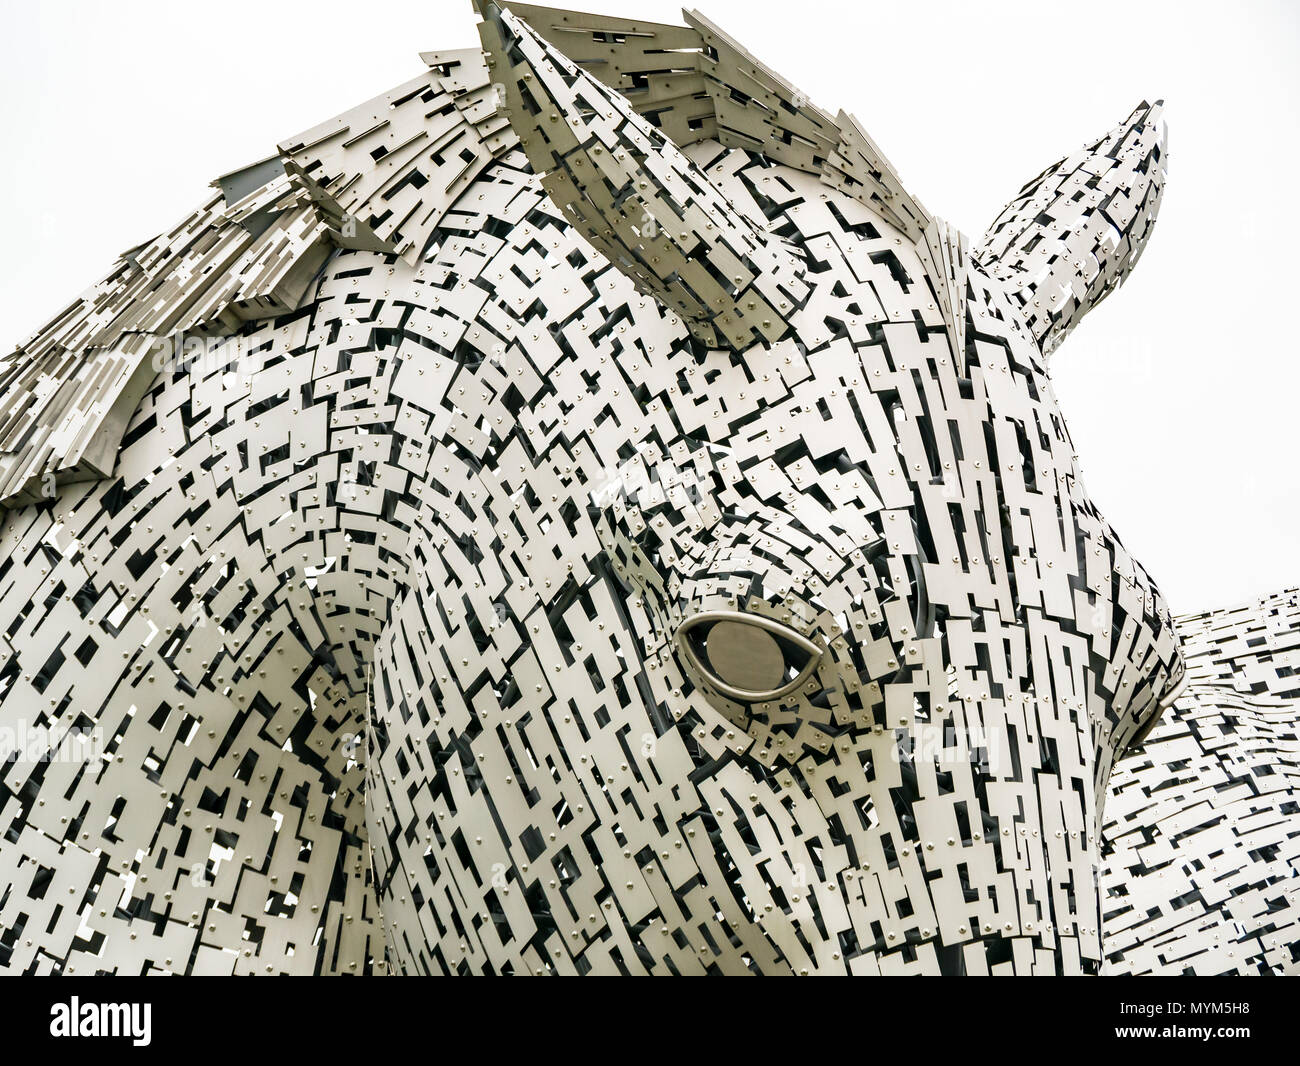 Close up of intricate metalwork horse head sculpture of Kelpie by Andy Scott, Helix Park, Falkirk, Scotland, UK Stock Photo